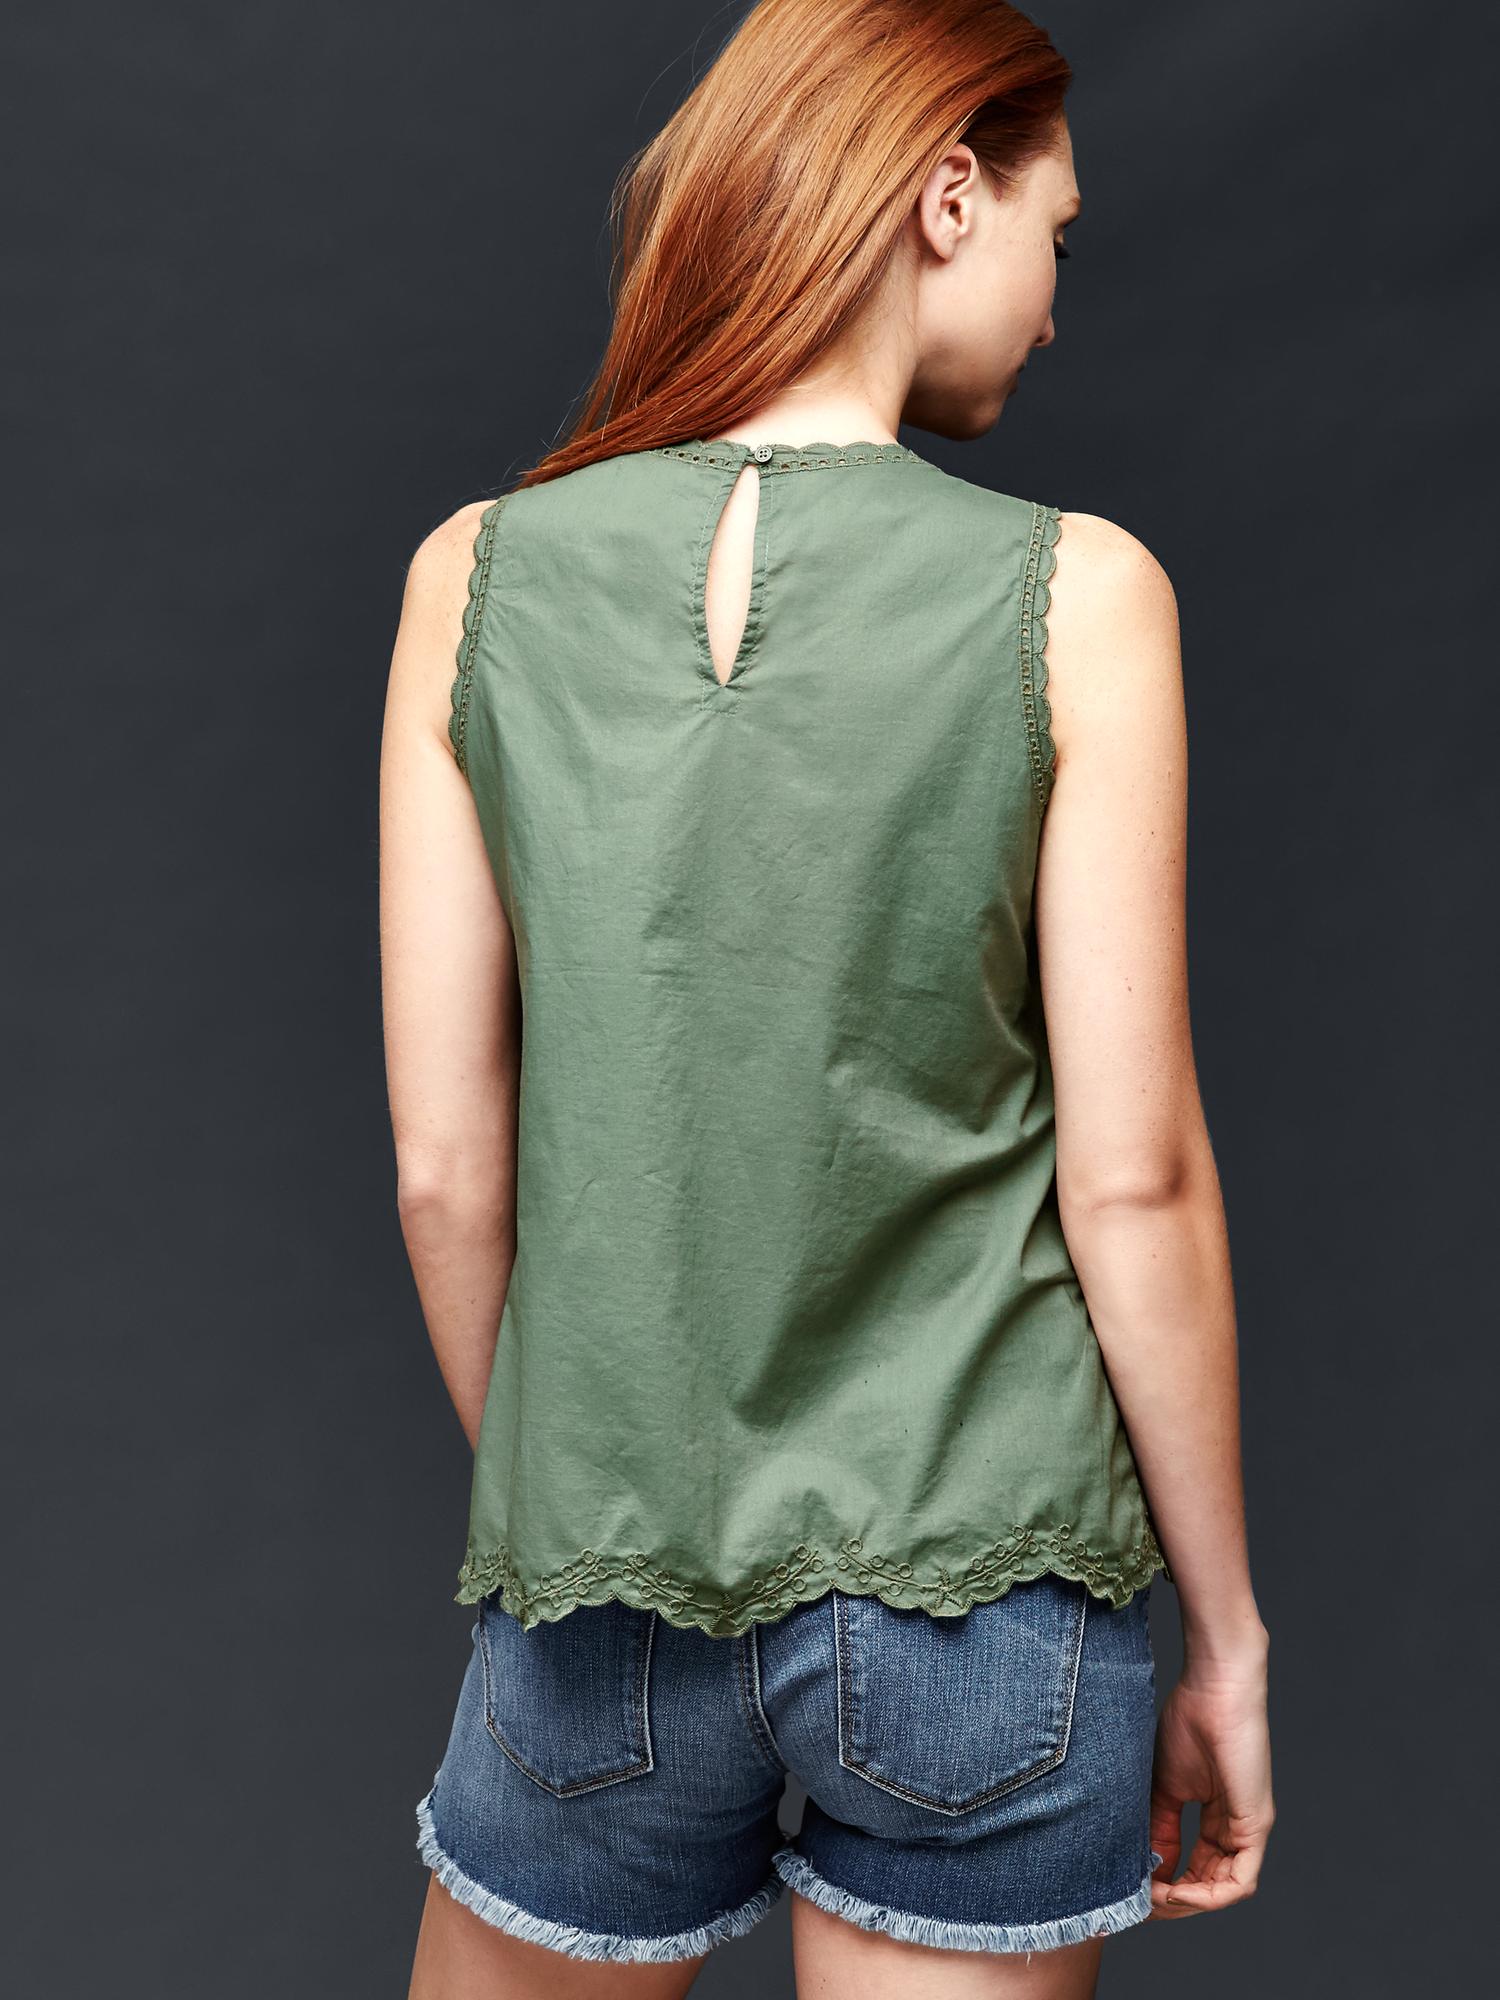 Embroidered tank